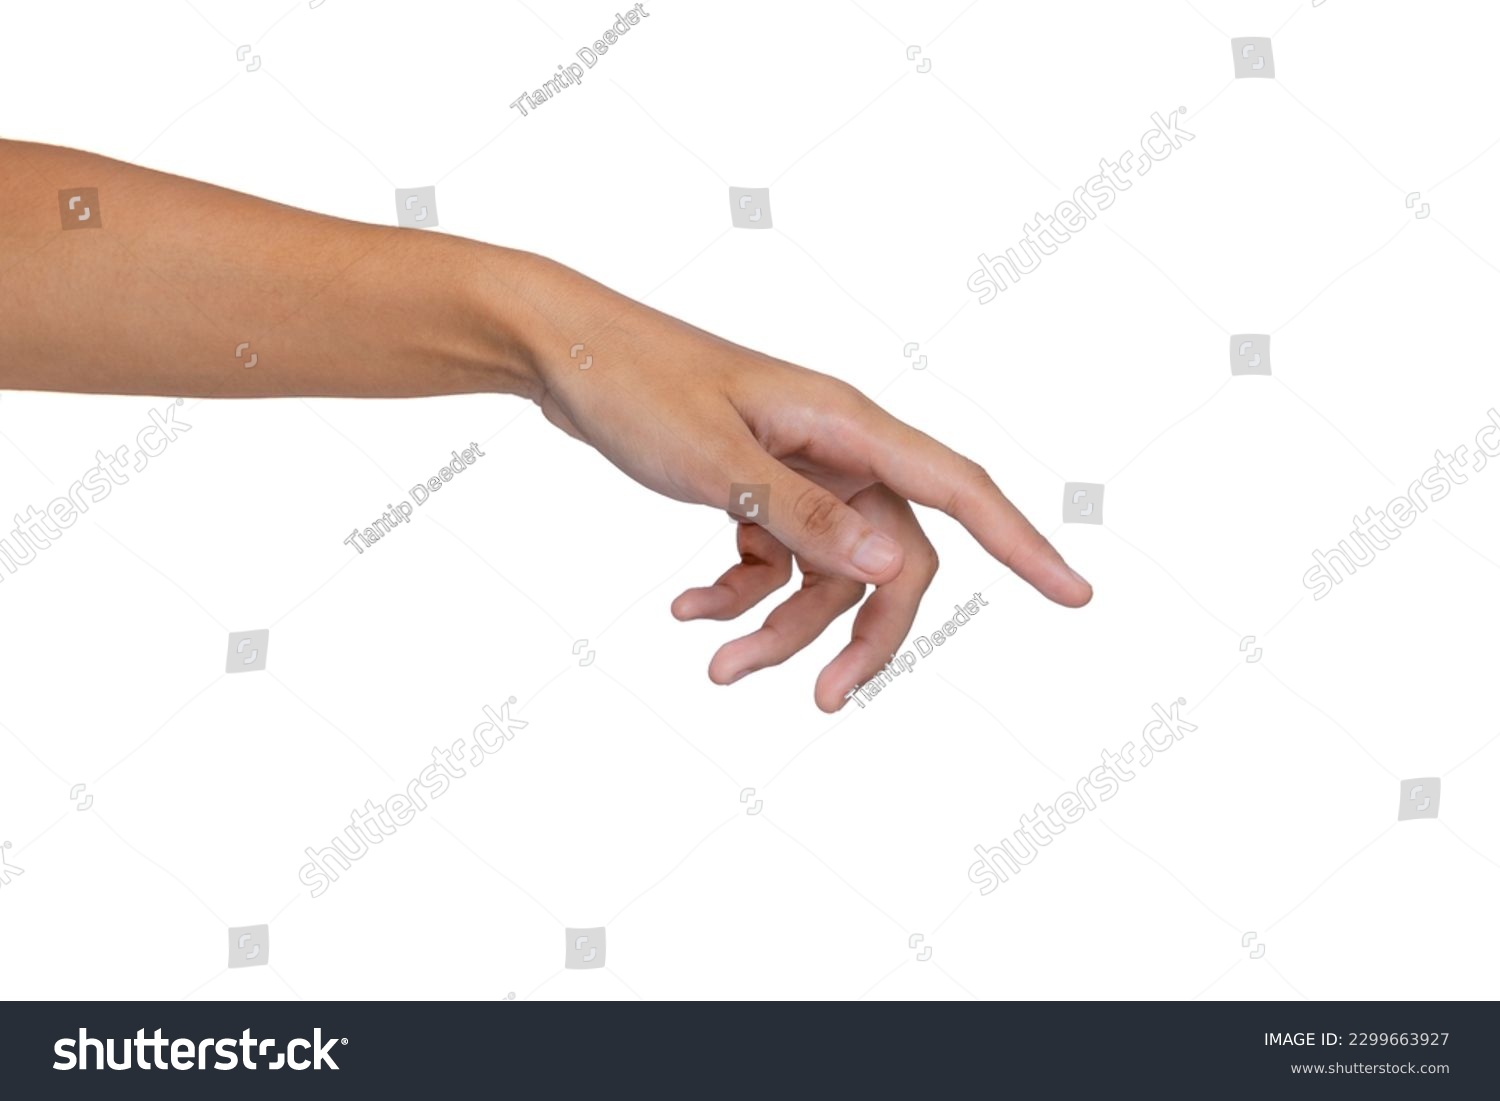 Woman's hands, isolated on white background. Nature. Beauty holding hands.
 #2299663927